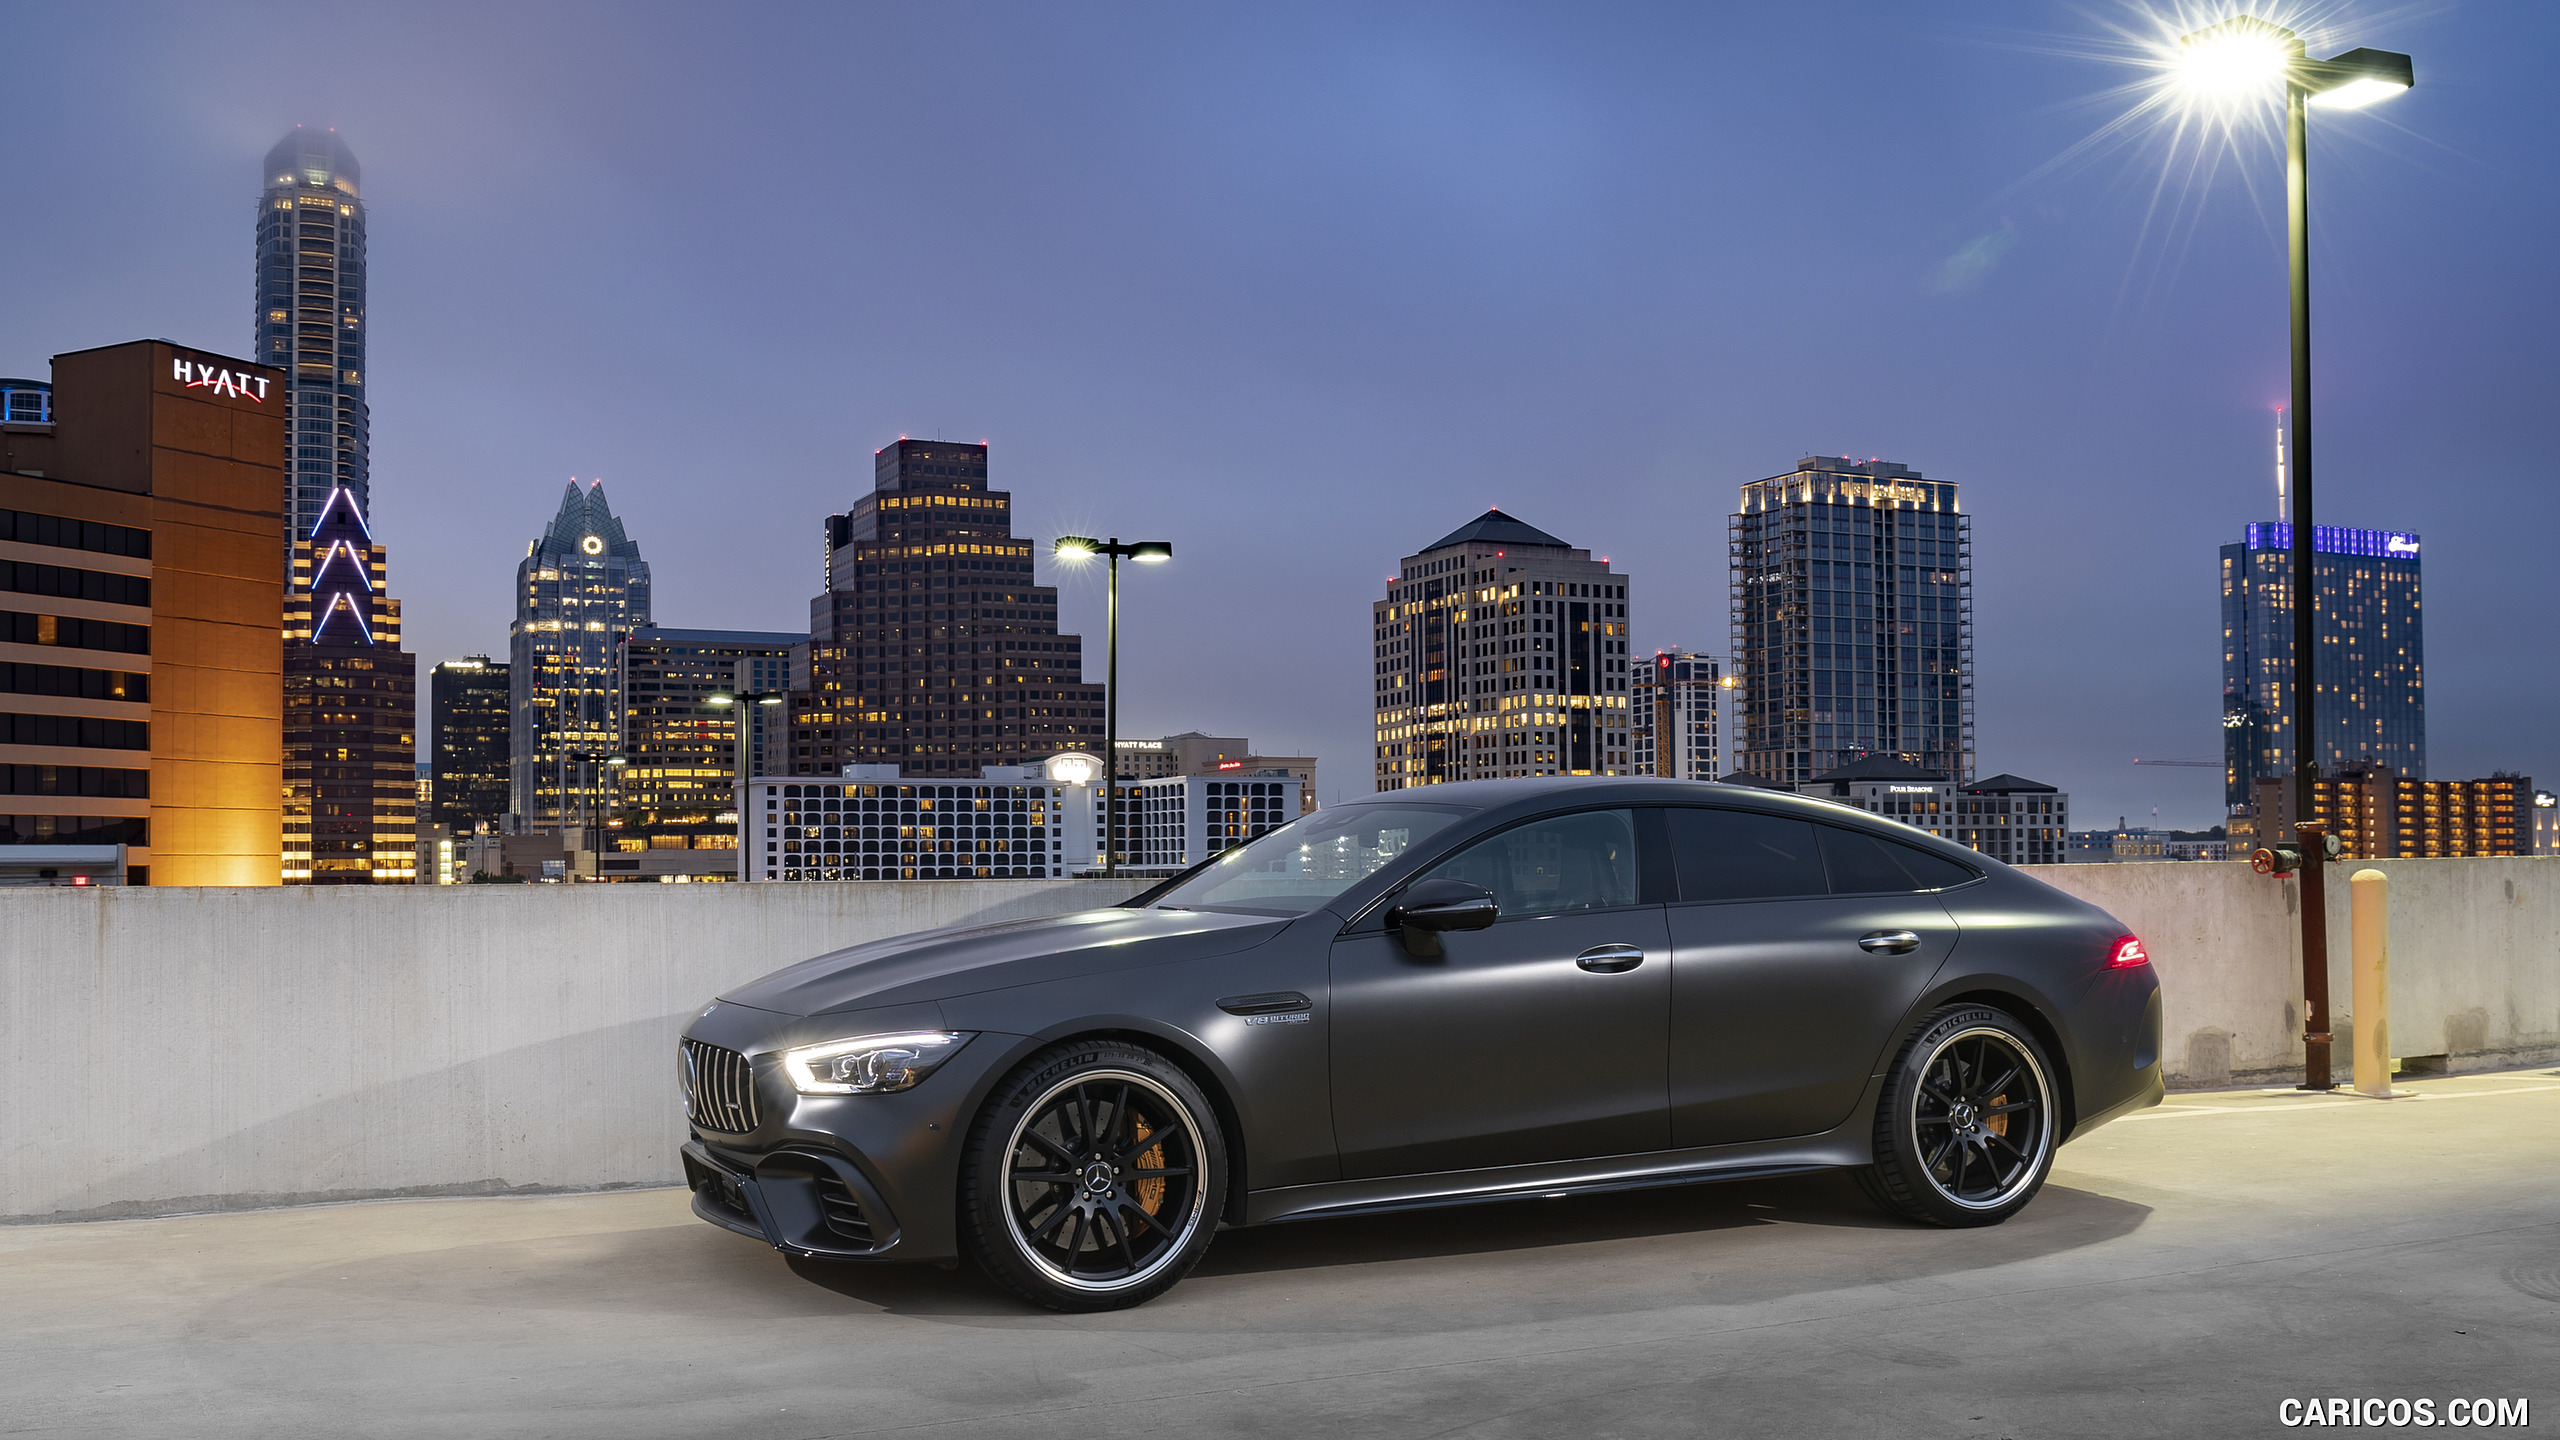 2019 Mercedes-AMG GT 63 S 4MATIC+ 4-Door Coupe - Side, #209 of 427